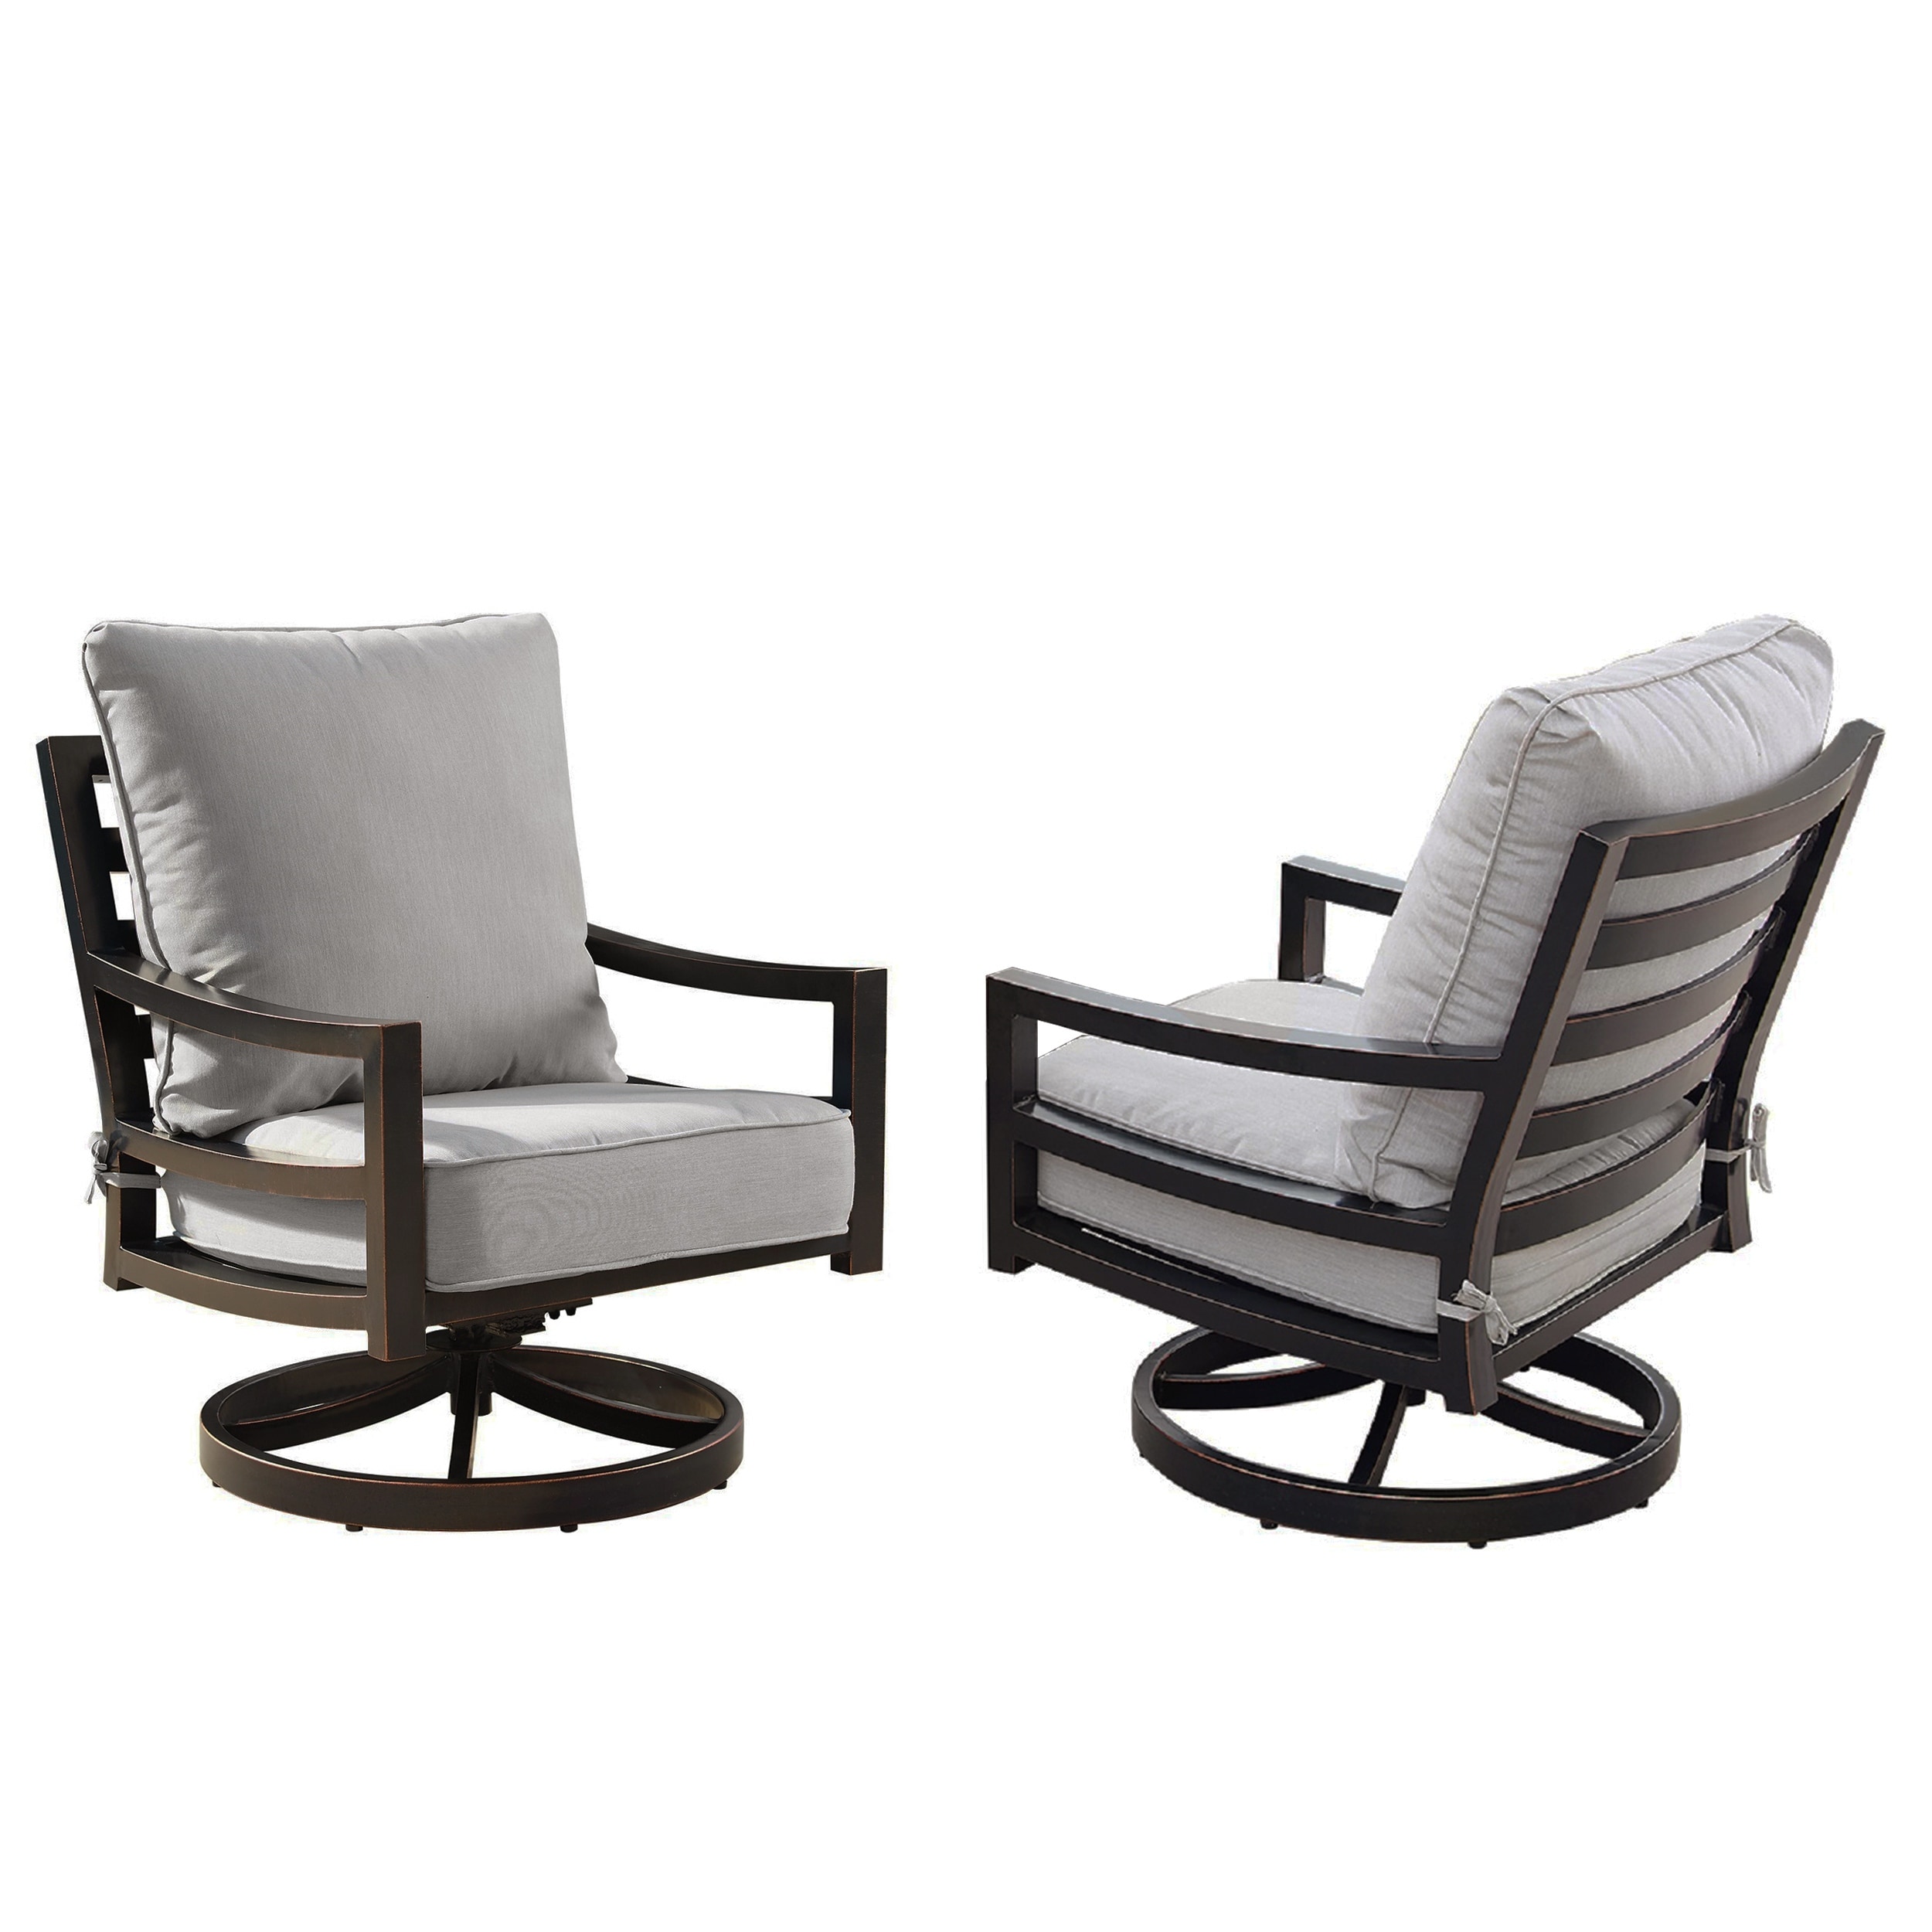 Aluminum Outdoor Deep Seating Swivel Rocking Club Chairs In Antique Copper Finish With Thick Grey Polyester Cushions (set Of 2)